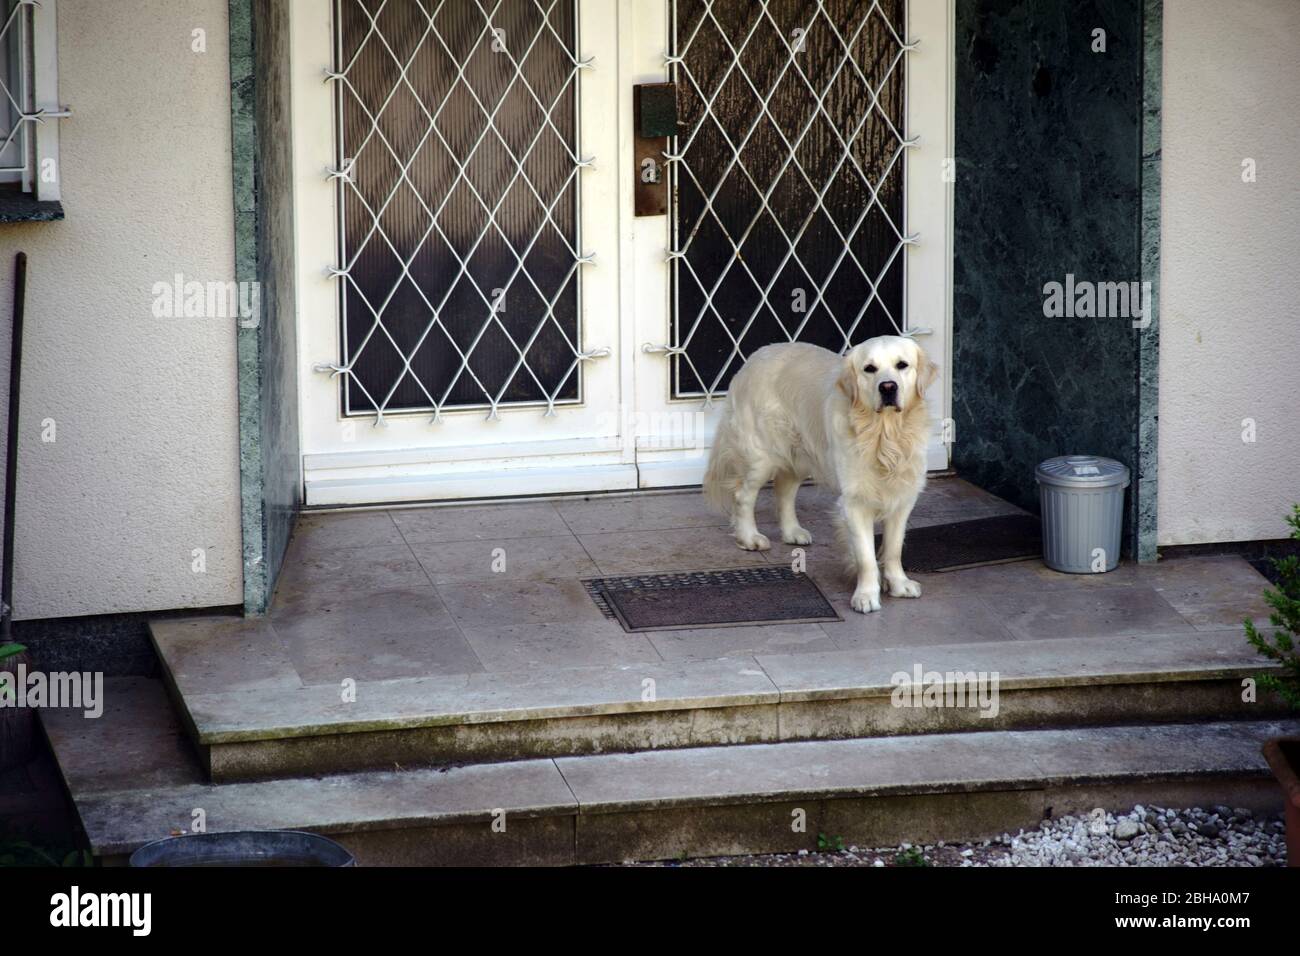 A gold retriever stands in front of the entrance of a residential building and guards the door. Stock Photo